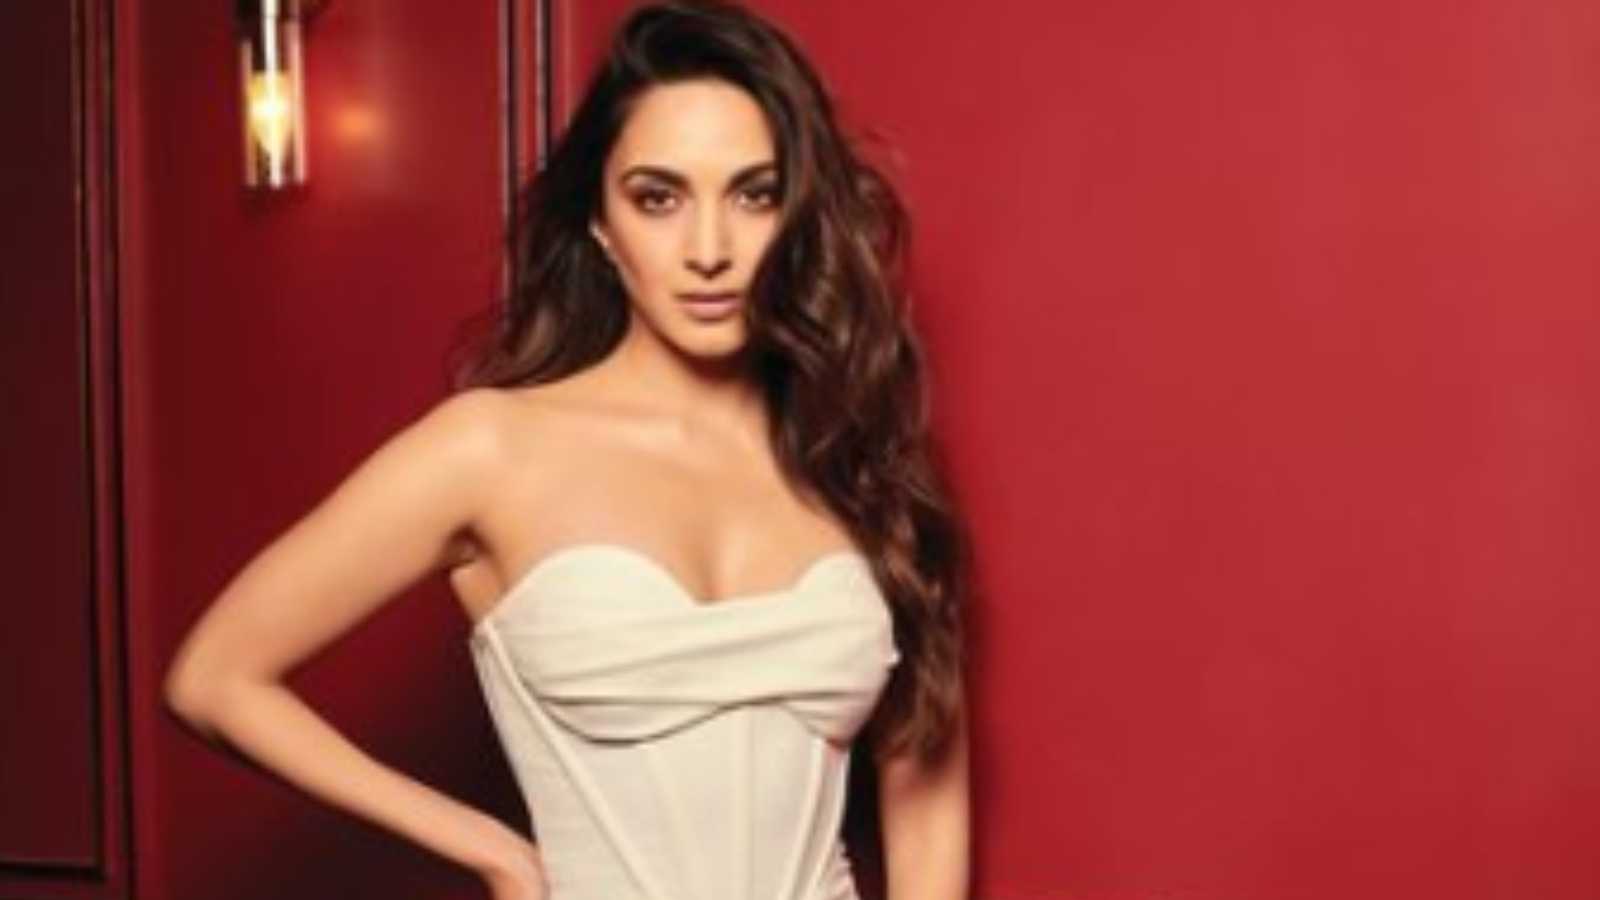 Sorry Sidharth Malhotra but Kiara Advani looks better with THIS actor, actress' best onscreen pairs ranked 